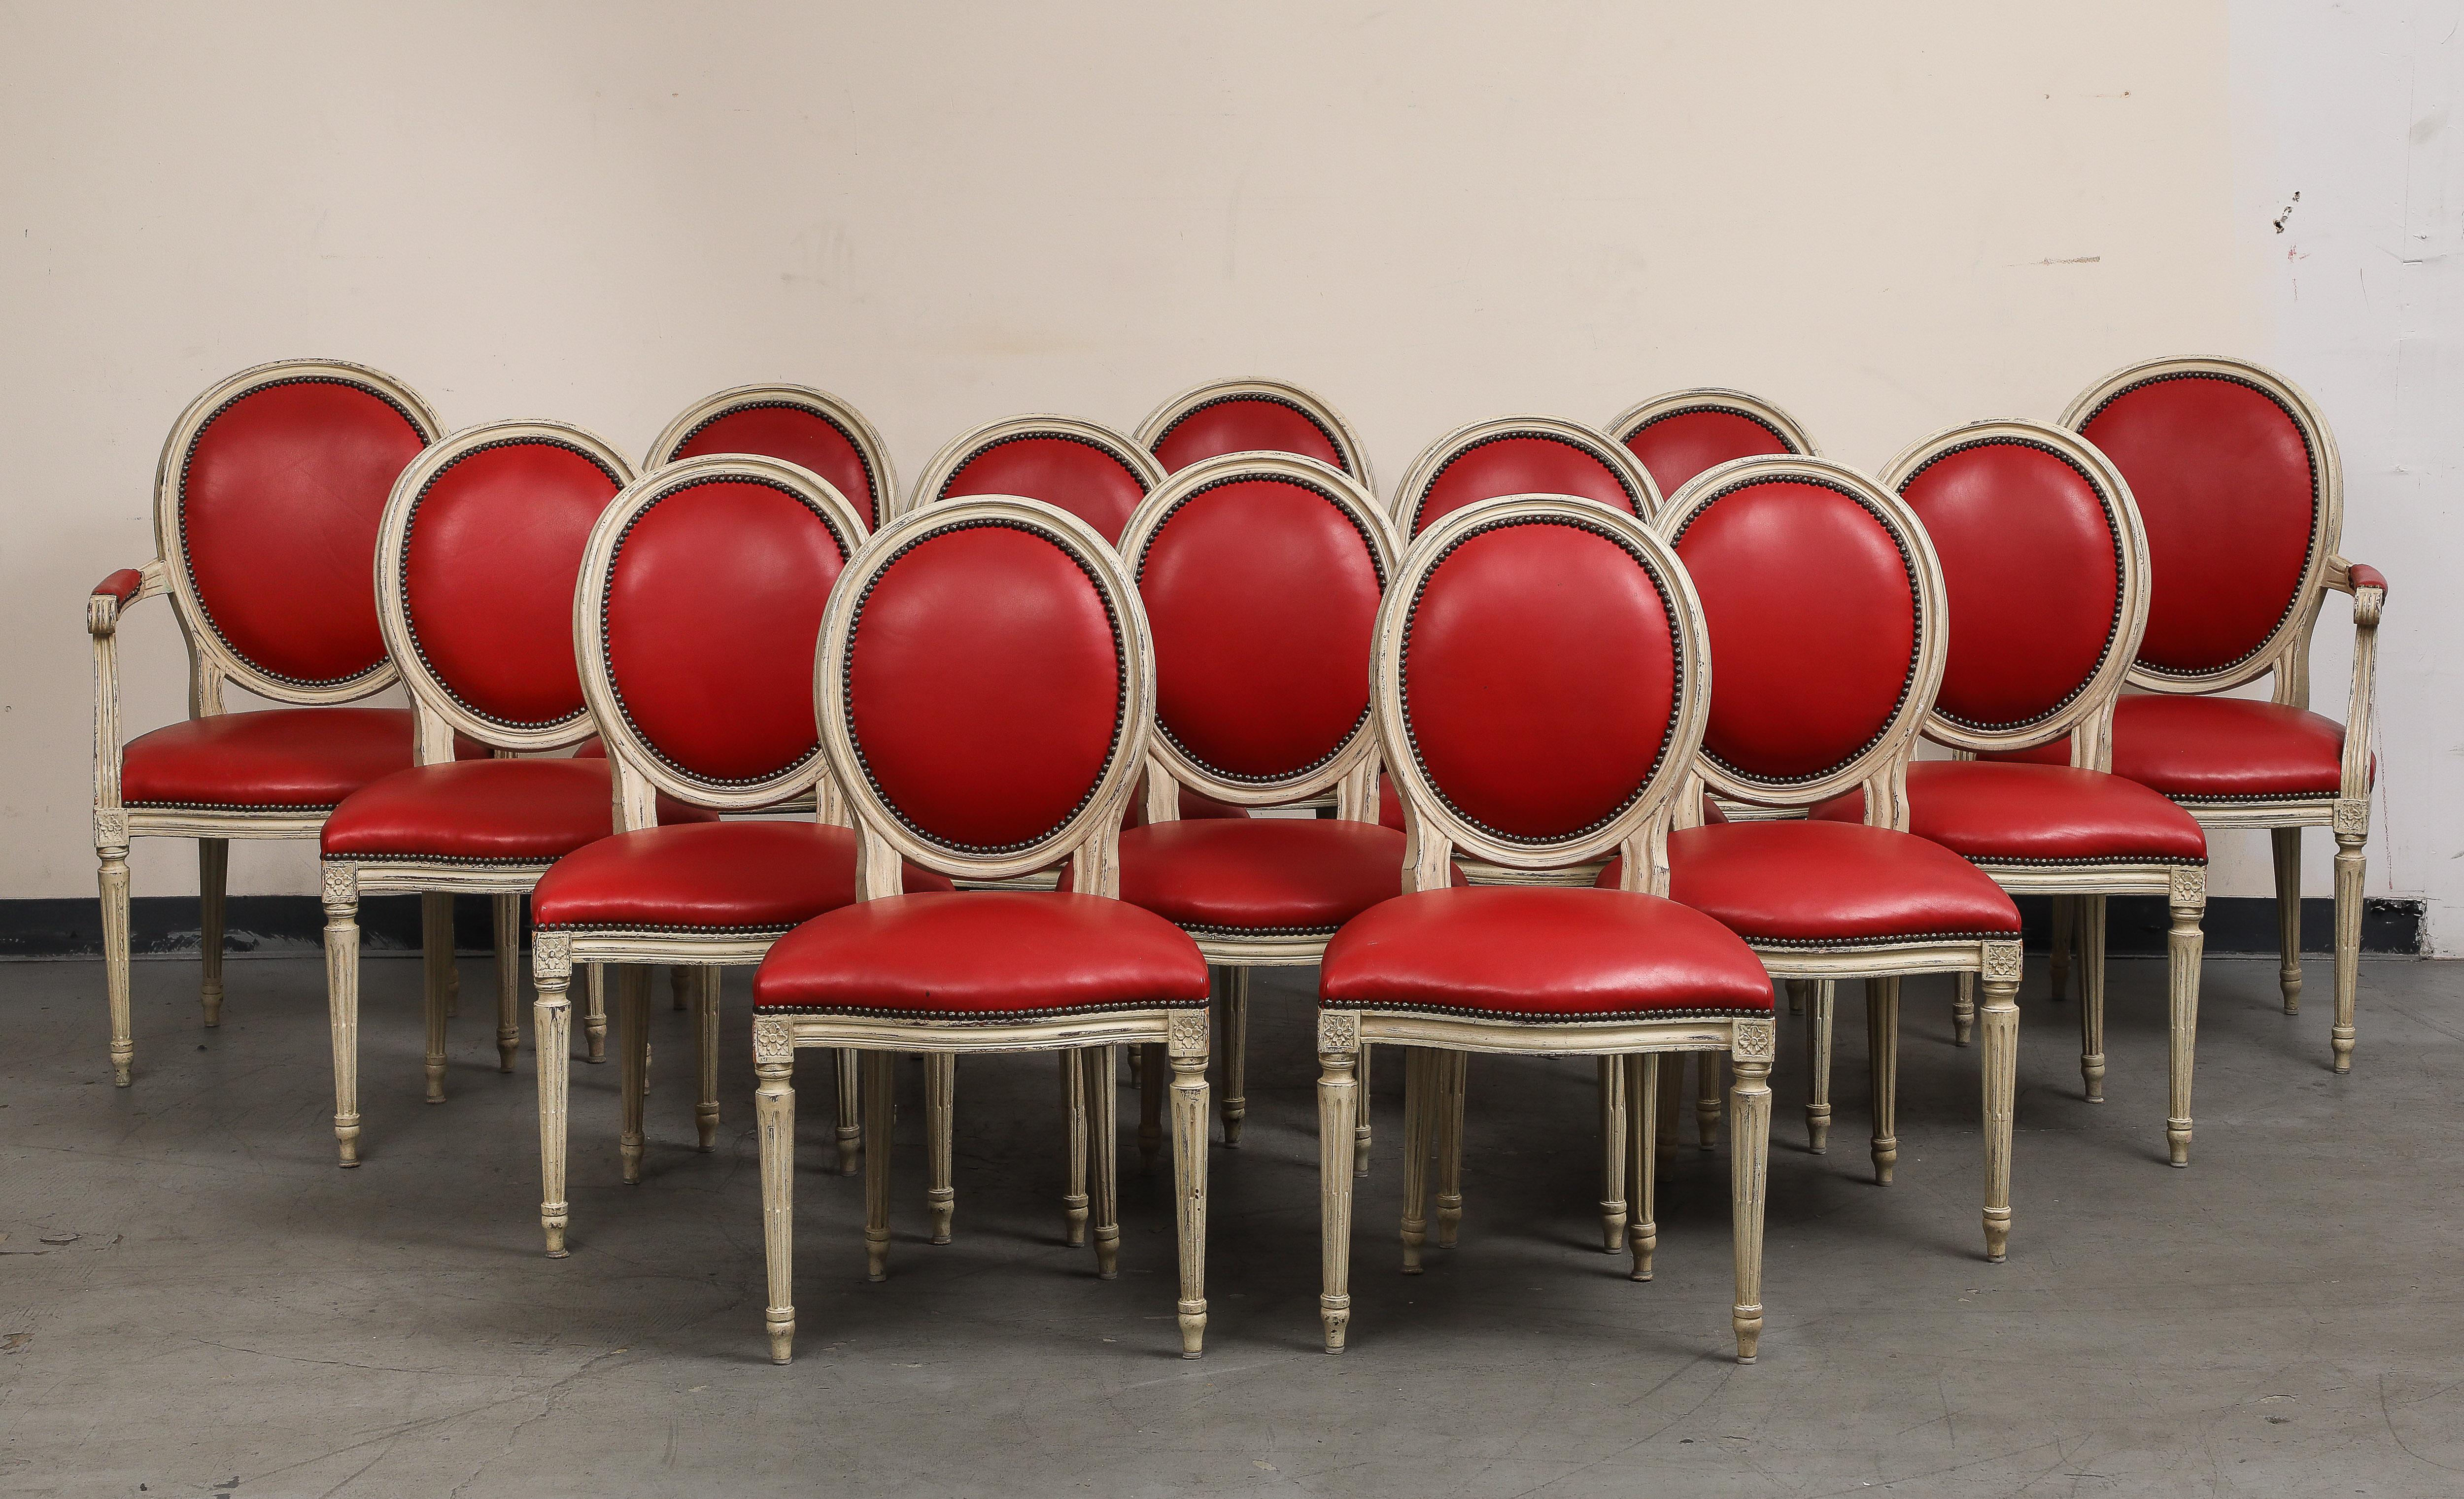 Group of fourteen (14) Louis XVI Style Grisaille grey-painted wood chairs with red leather seats and back by Baker Furniture. Late 20th Century. 
Tagged Baker Furniture in brass on underside. 

